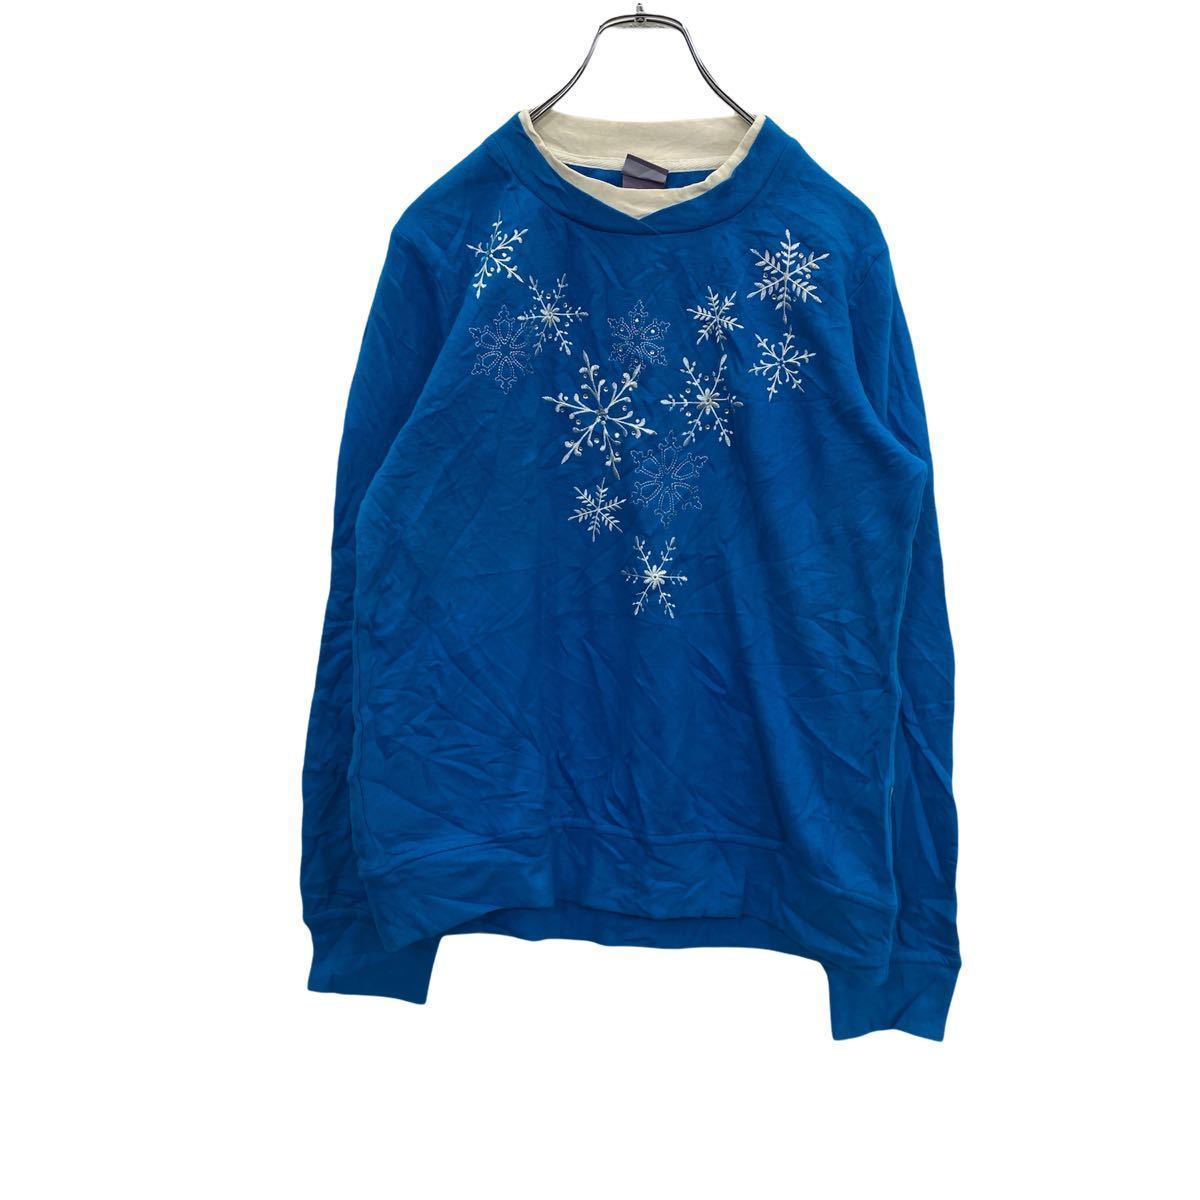 LAURA SCOTT sweat lady's S blue roller Scott reverse side nappy sweatshirt embroidery snow. crystal old clothes . America buying up t2201-4617